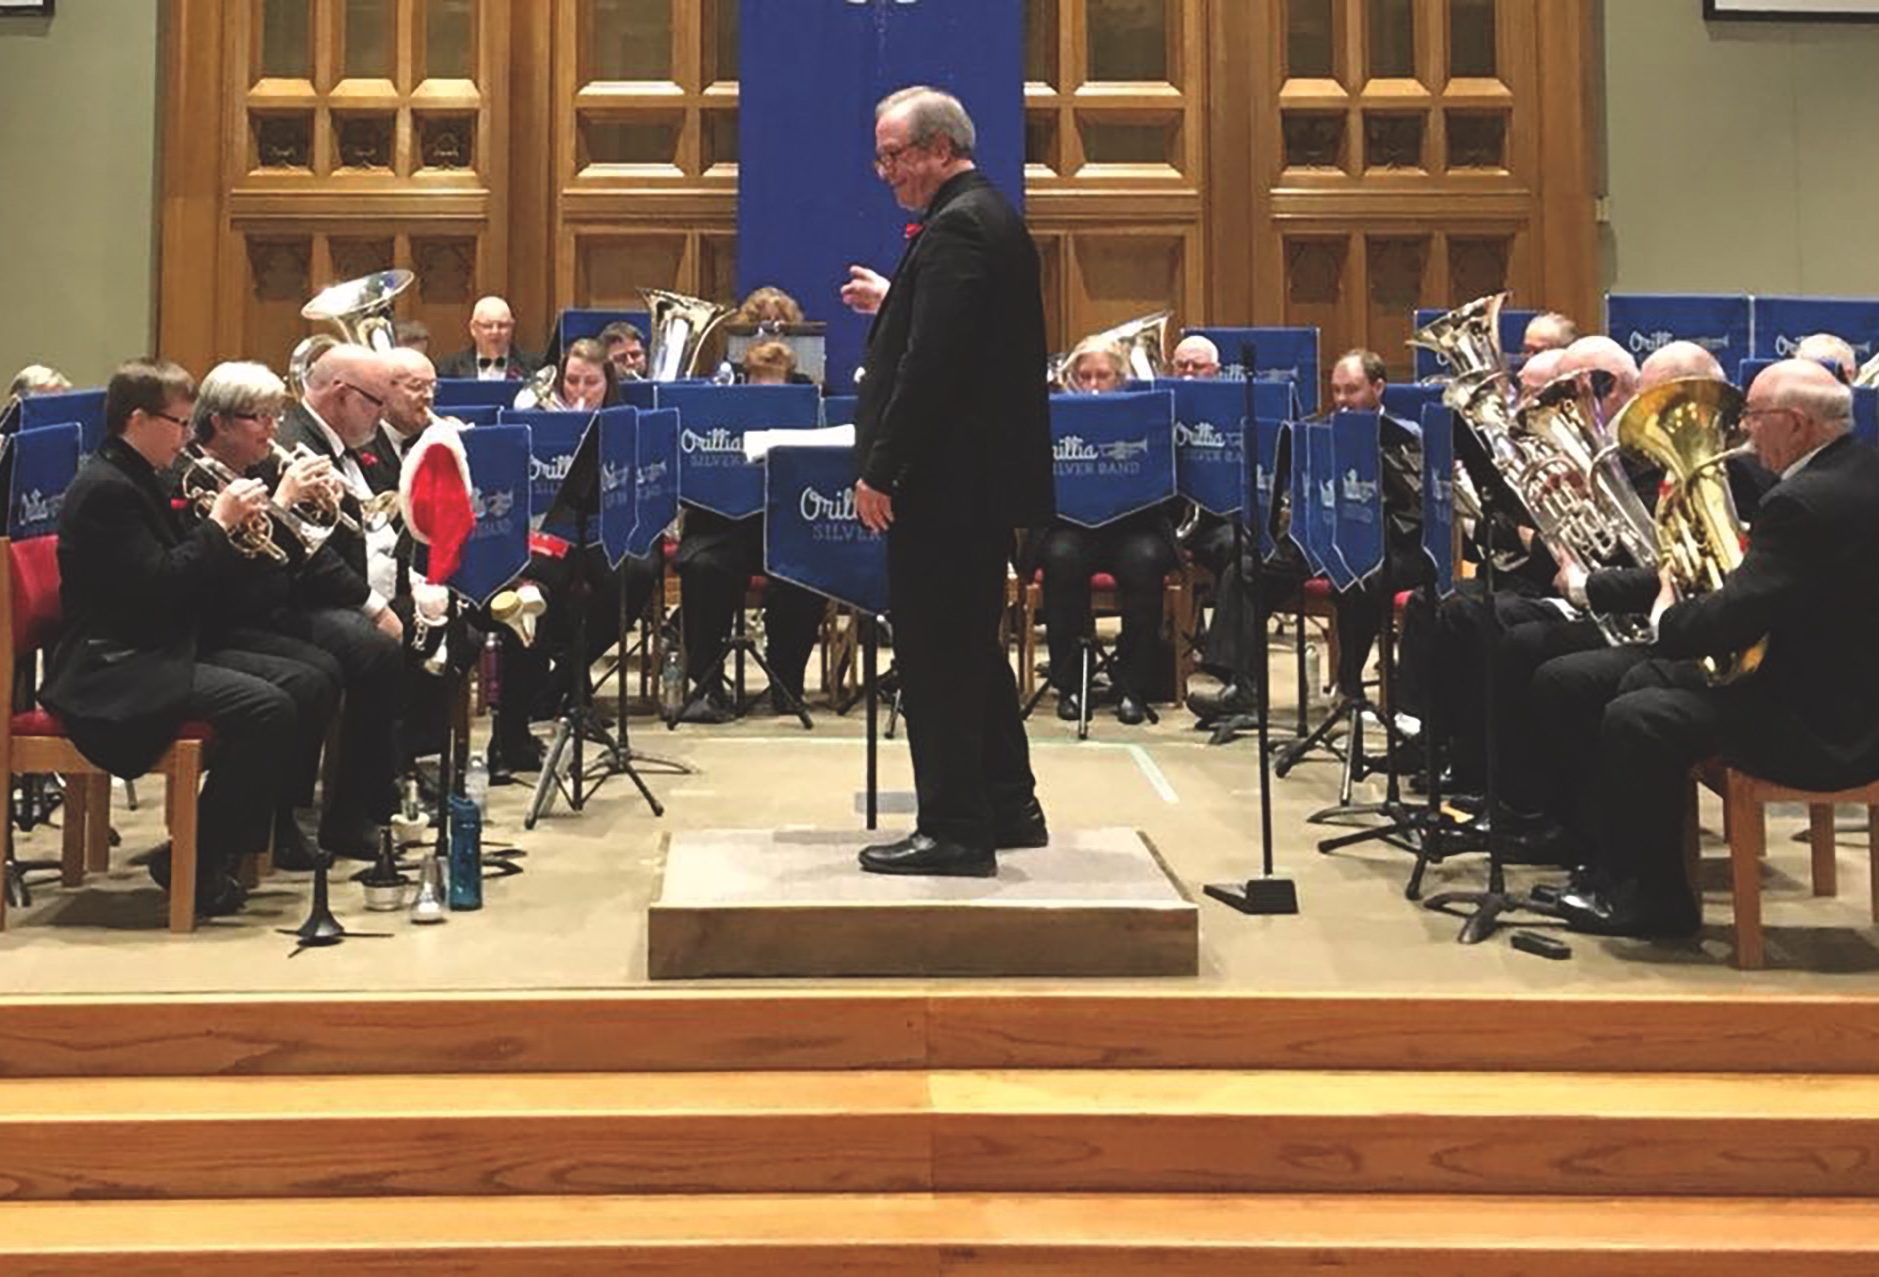 The Orillia Silver Band on stage at St. Paul’s United in December 2017. (Photo courtesy St. Paul's United)